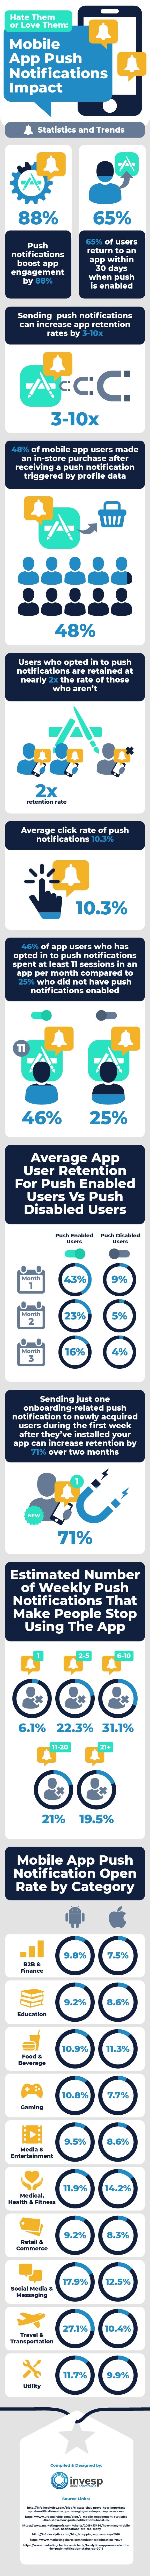 The growing importance of mobile app push notification – Statistics and Trends